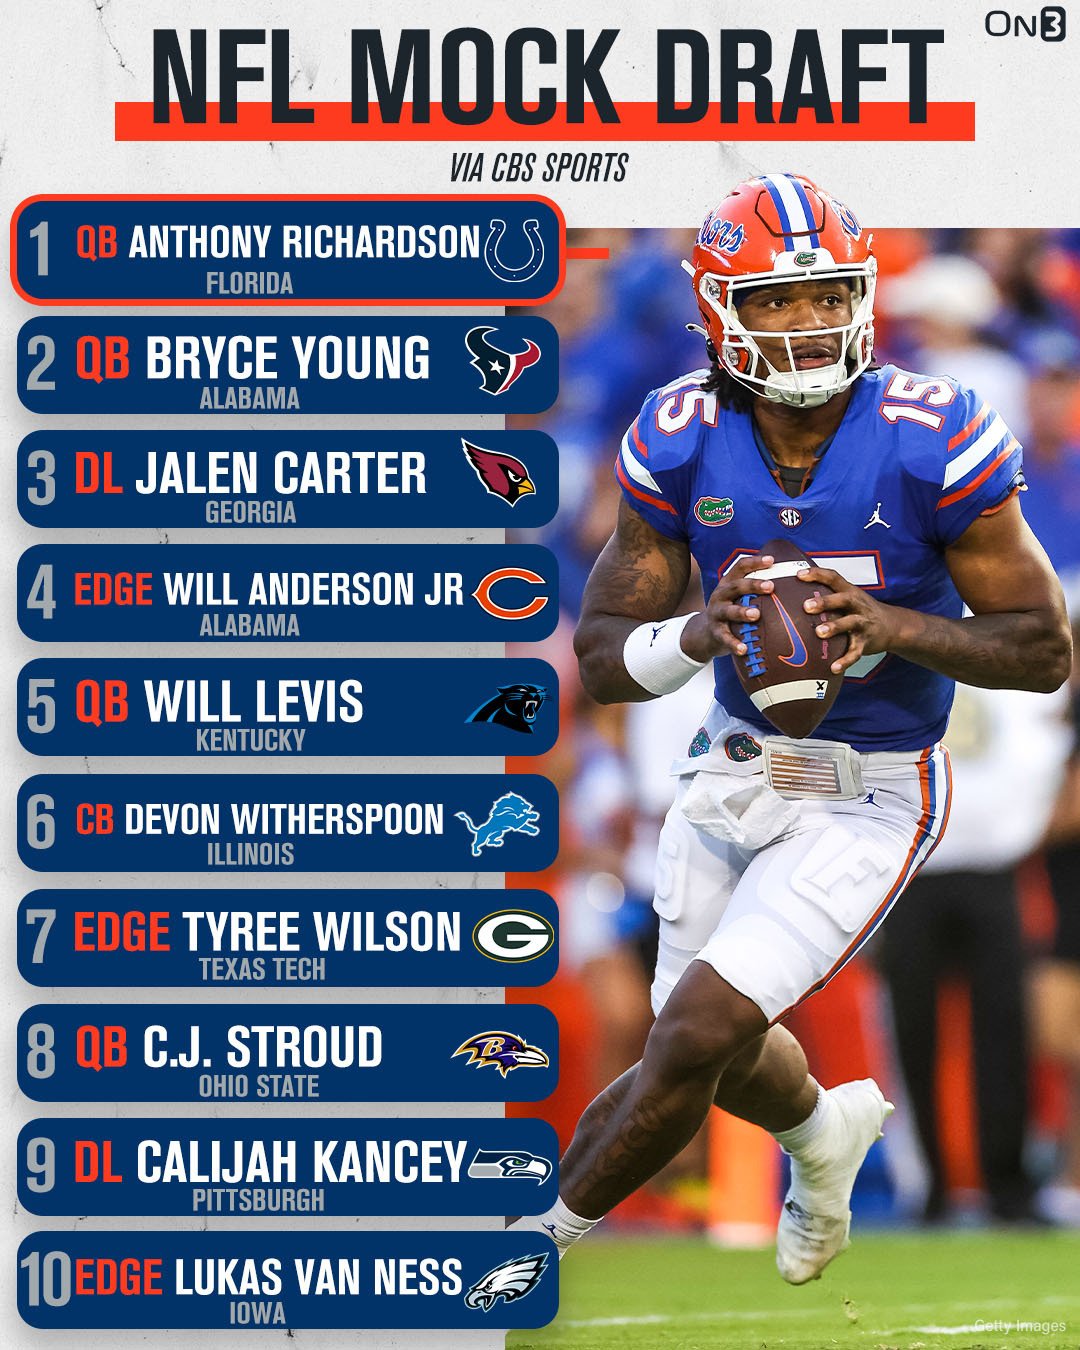 On3 on X: 'CBS Sports has projected Florida QB Anthony Richardson to be  selected No. 1 in the 2023 NFL Draft